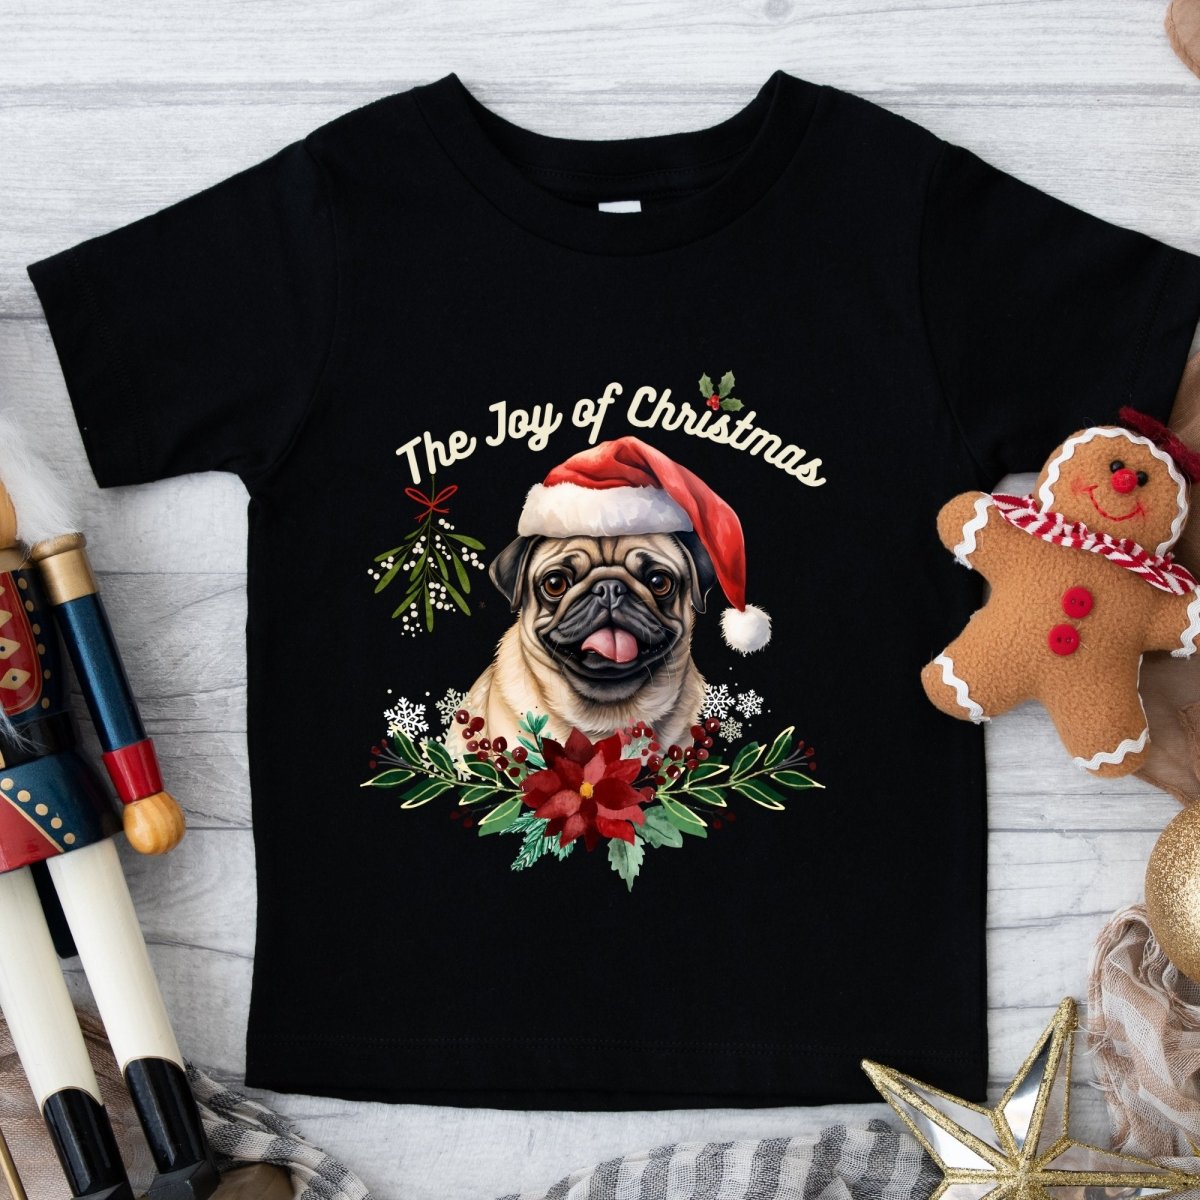 Christmas Pug T-Shirt - High Quality Festive Family Children T-Shirt, Gift for Her, Gift for Doglovers, Cute Xmas Dog Tee, Toddler Xmas Tee - Everything Pixel